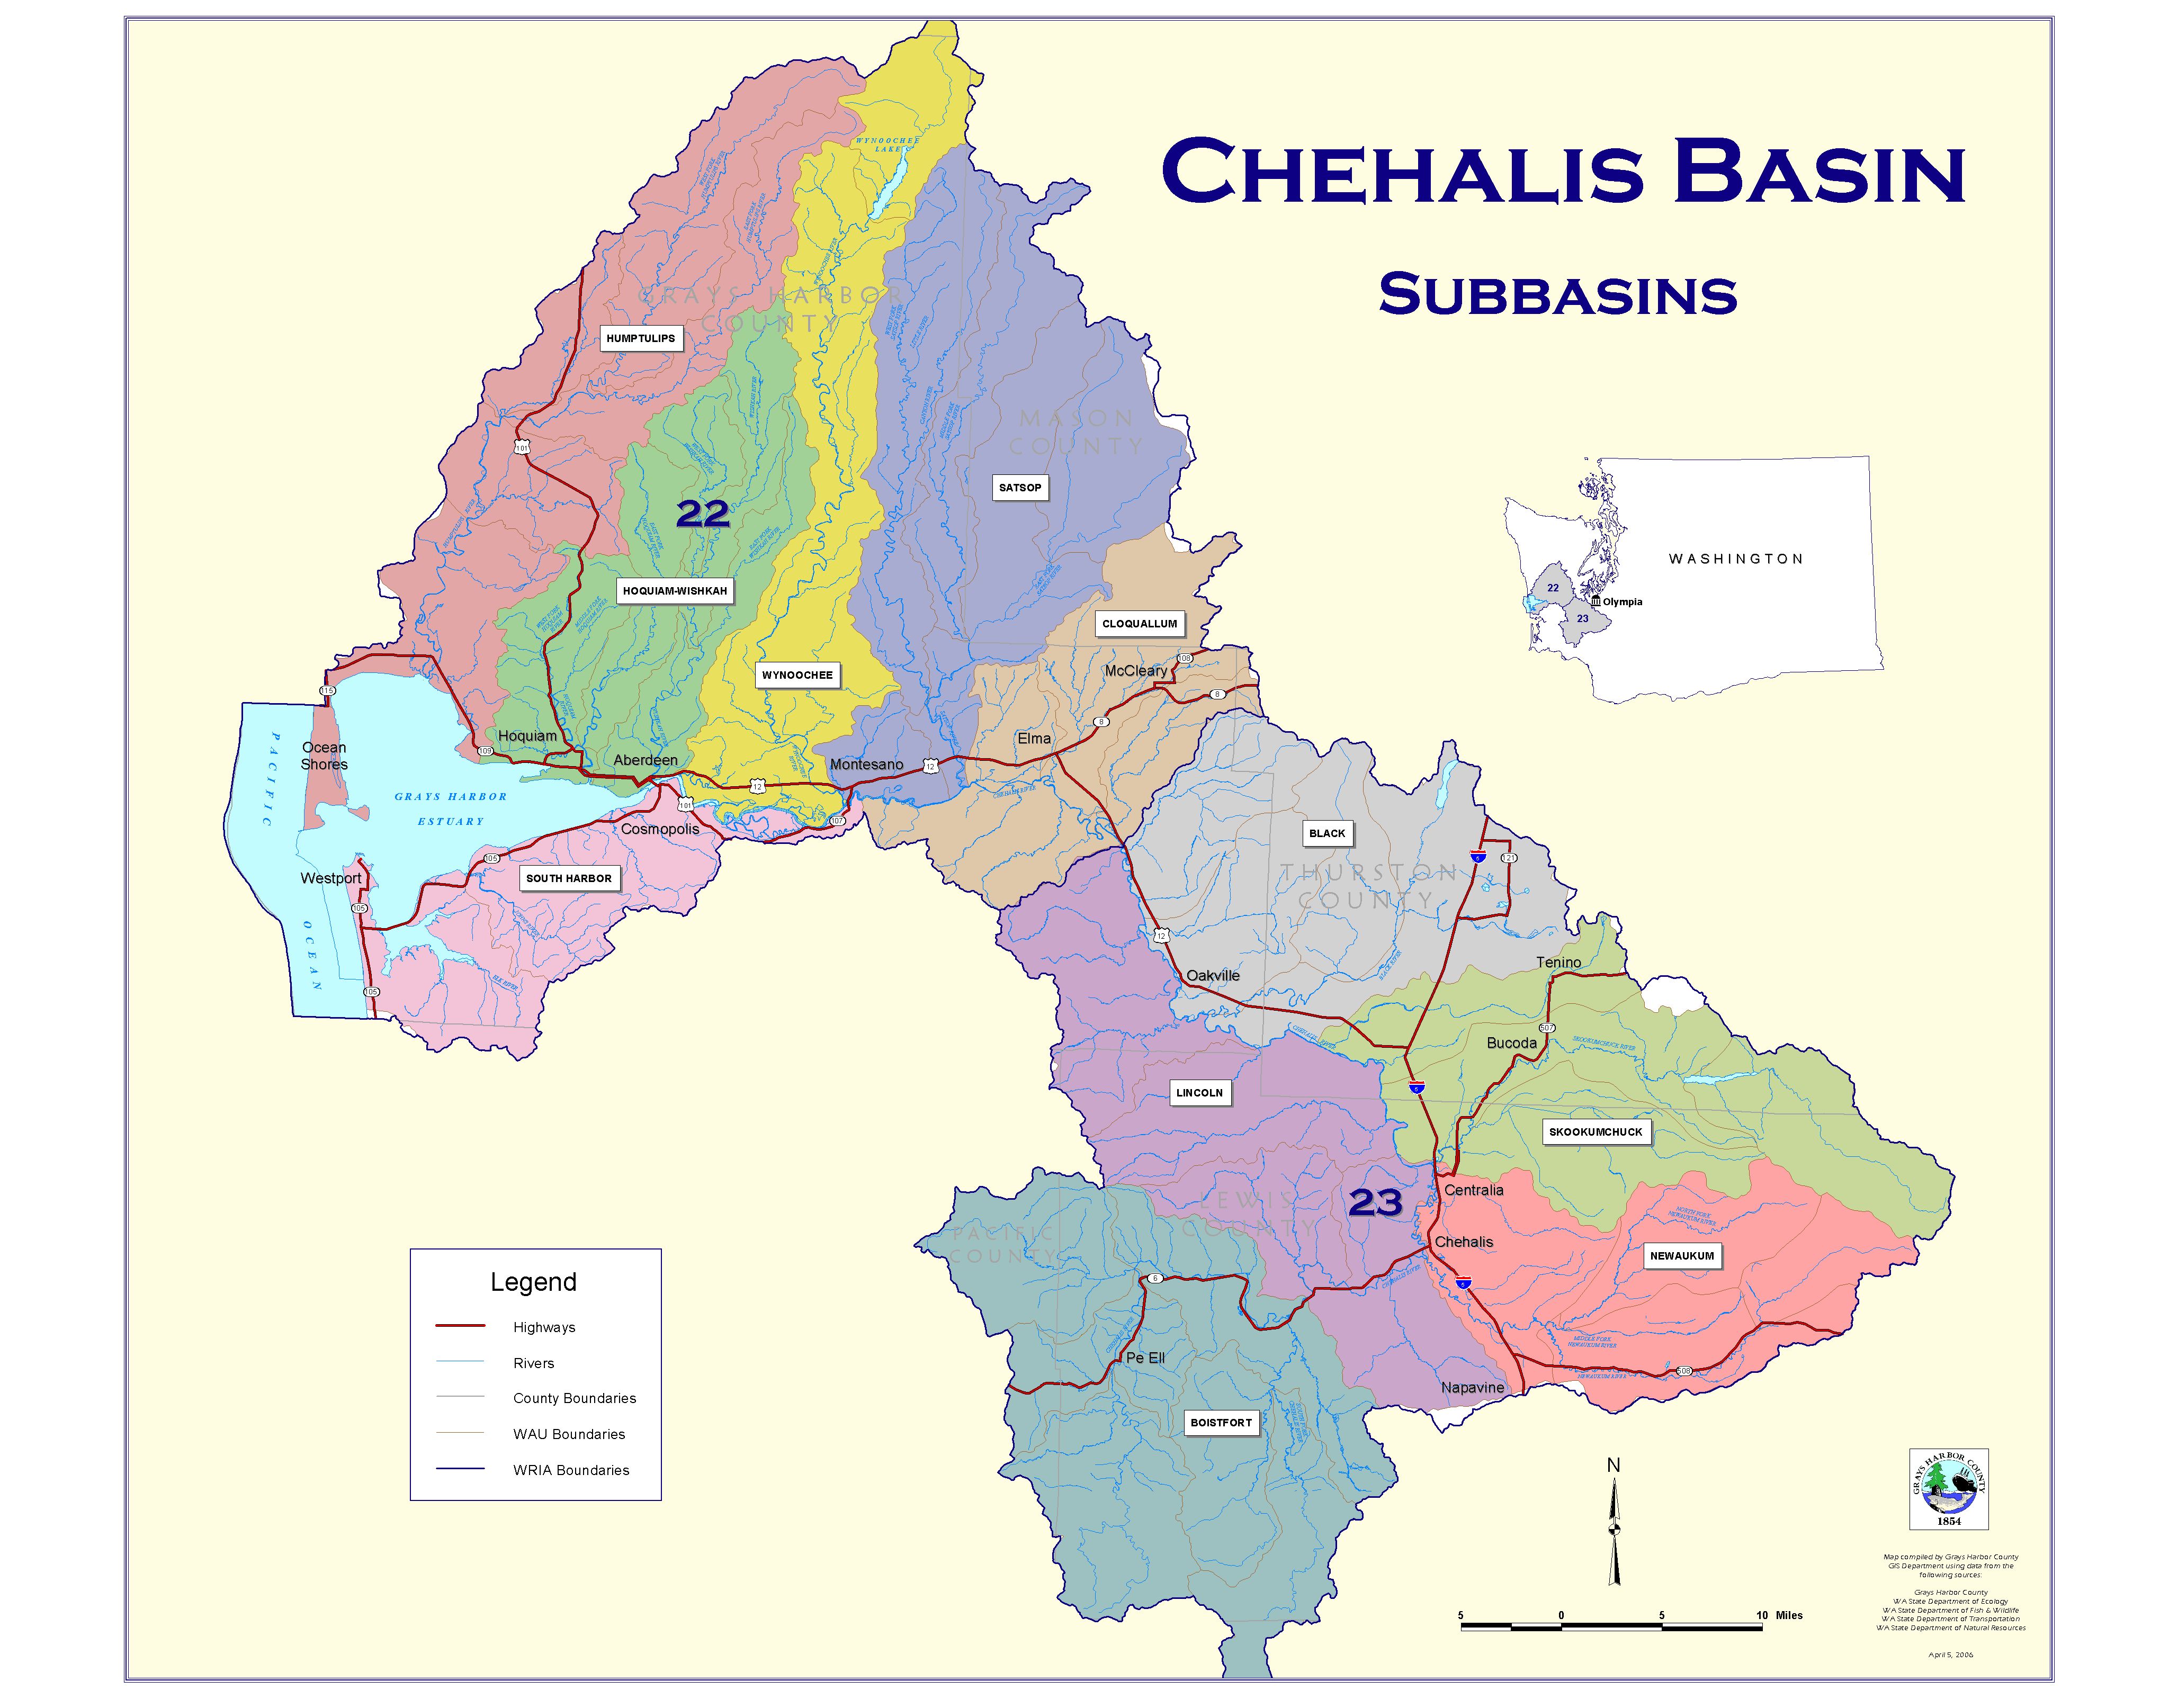 The 11 major subbasins in the Chehalis Watershed